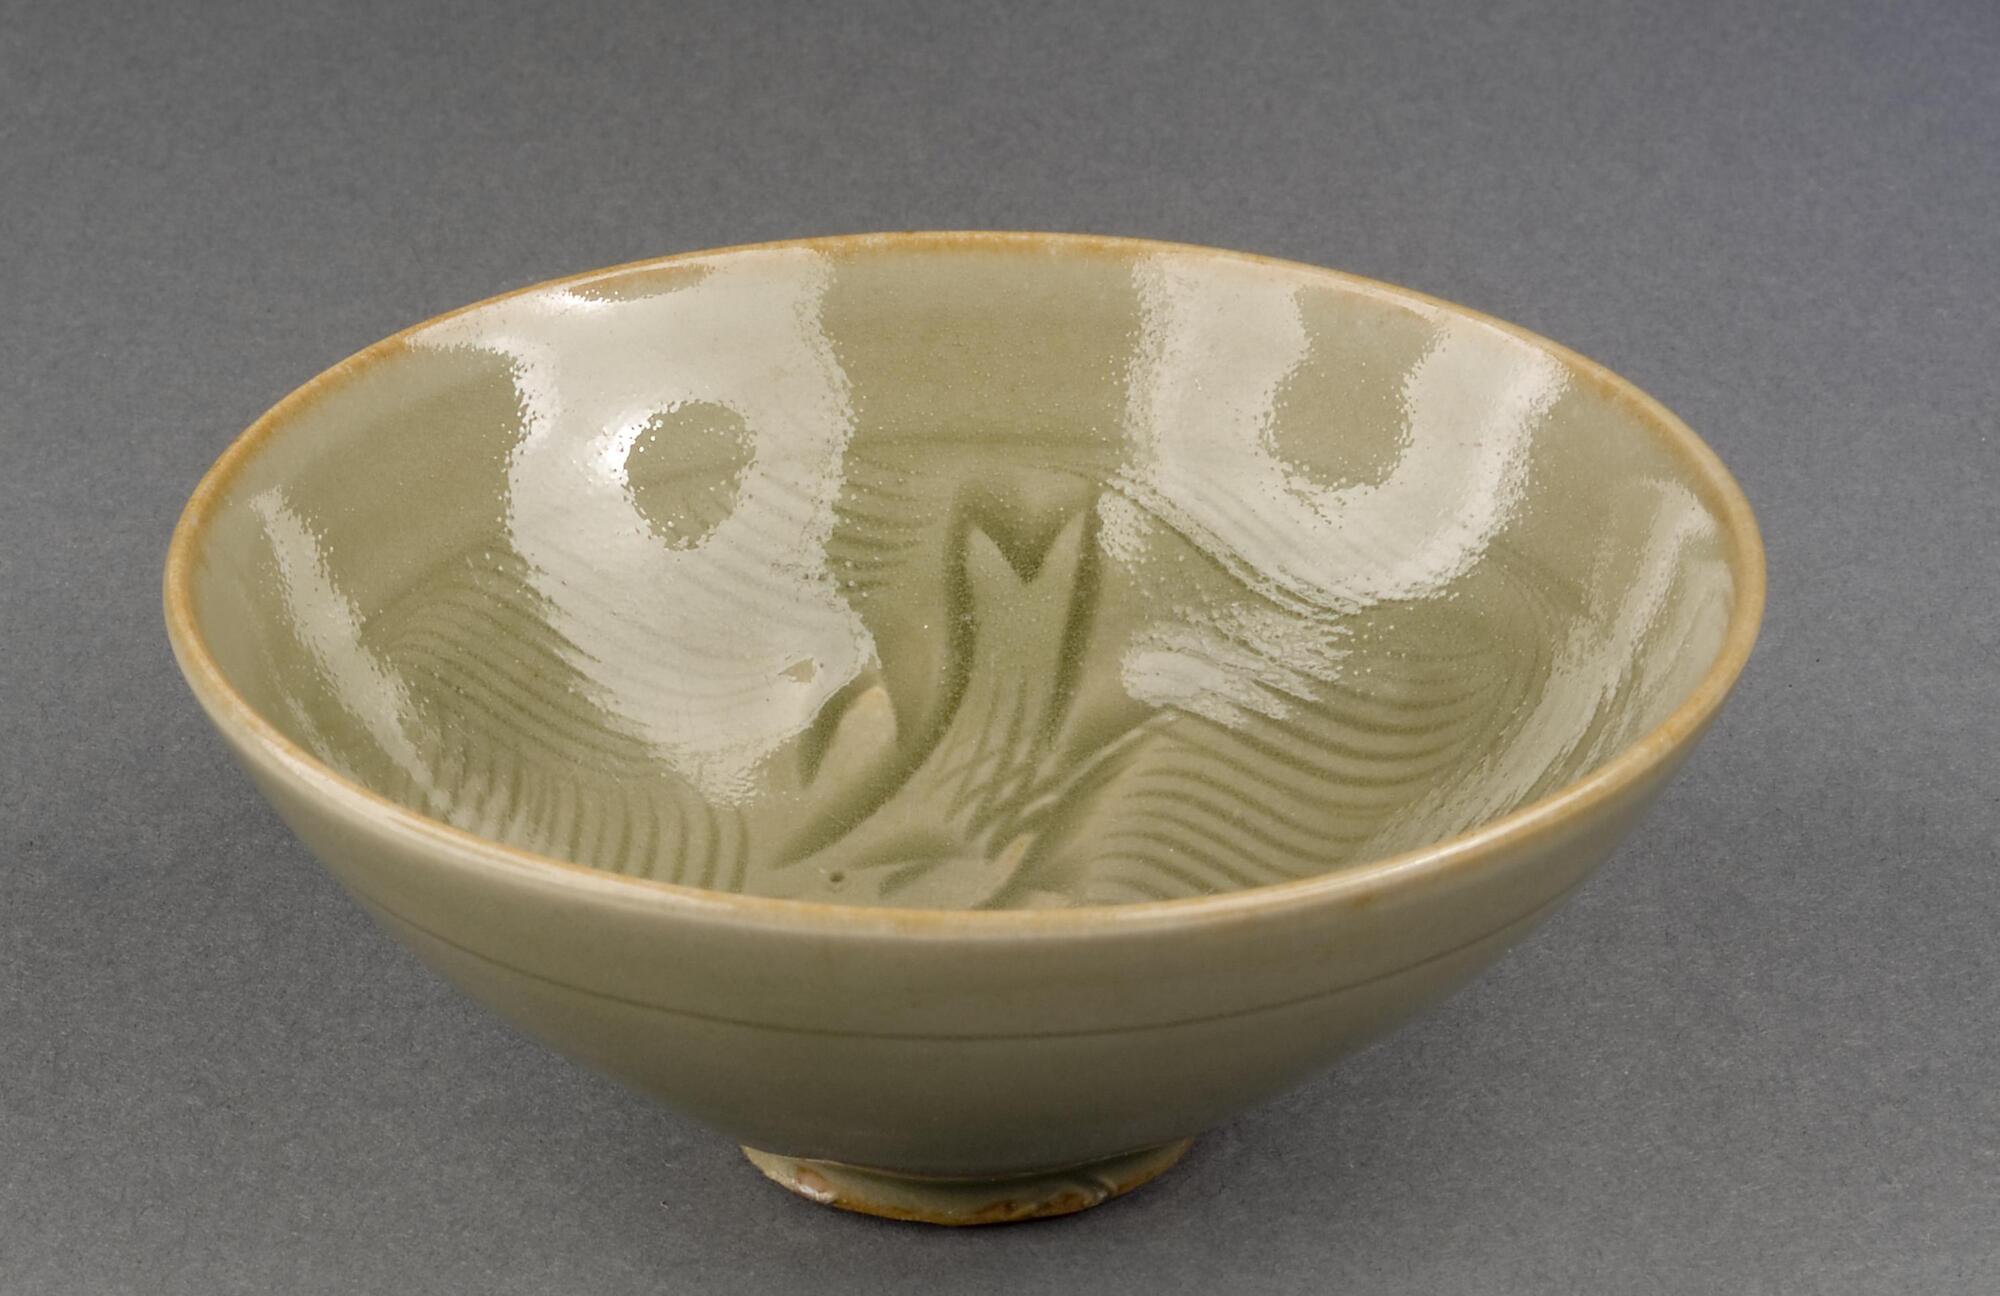 a northern celadon bowl of conical shape, incised with abstract depictions of fish and waves on interior, small ring foot